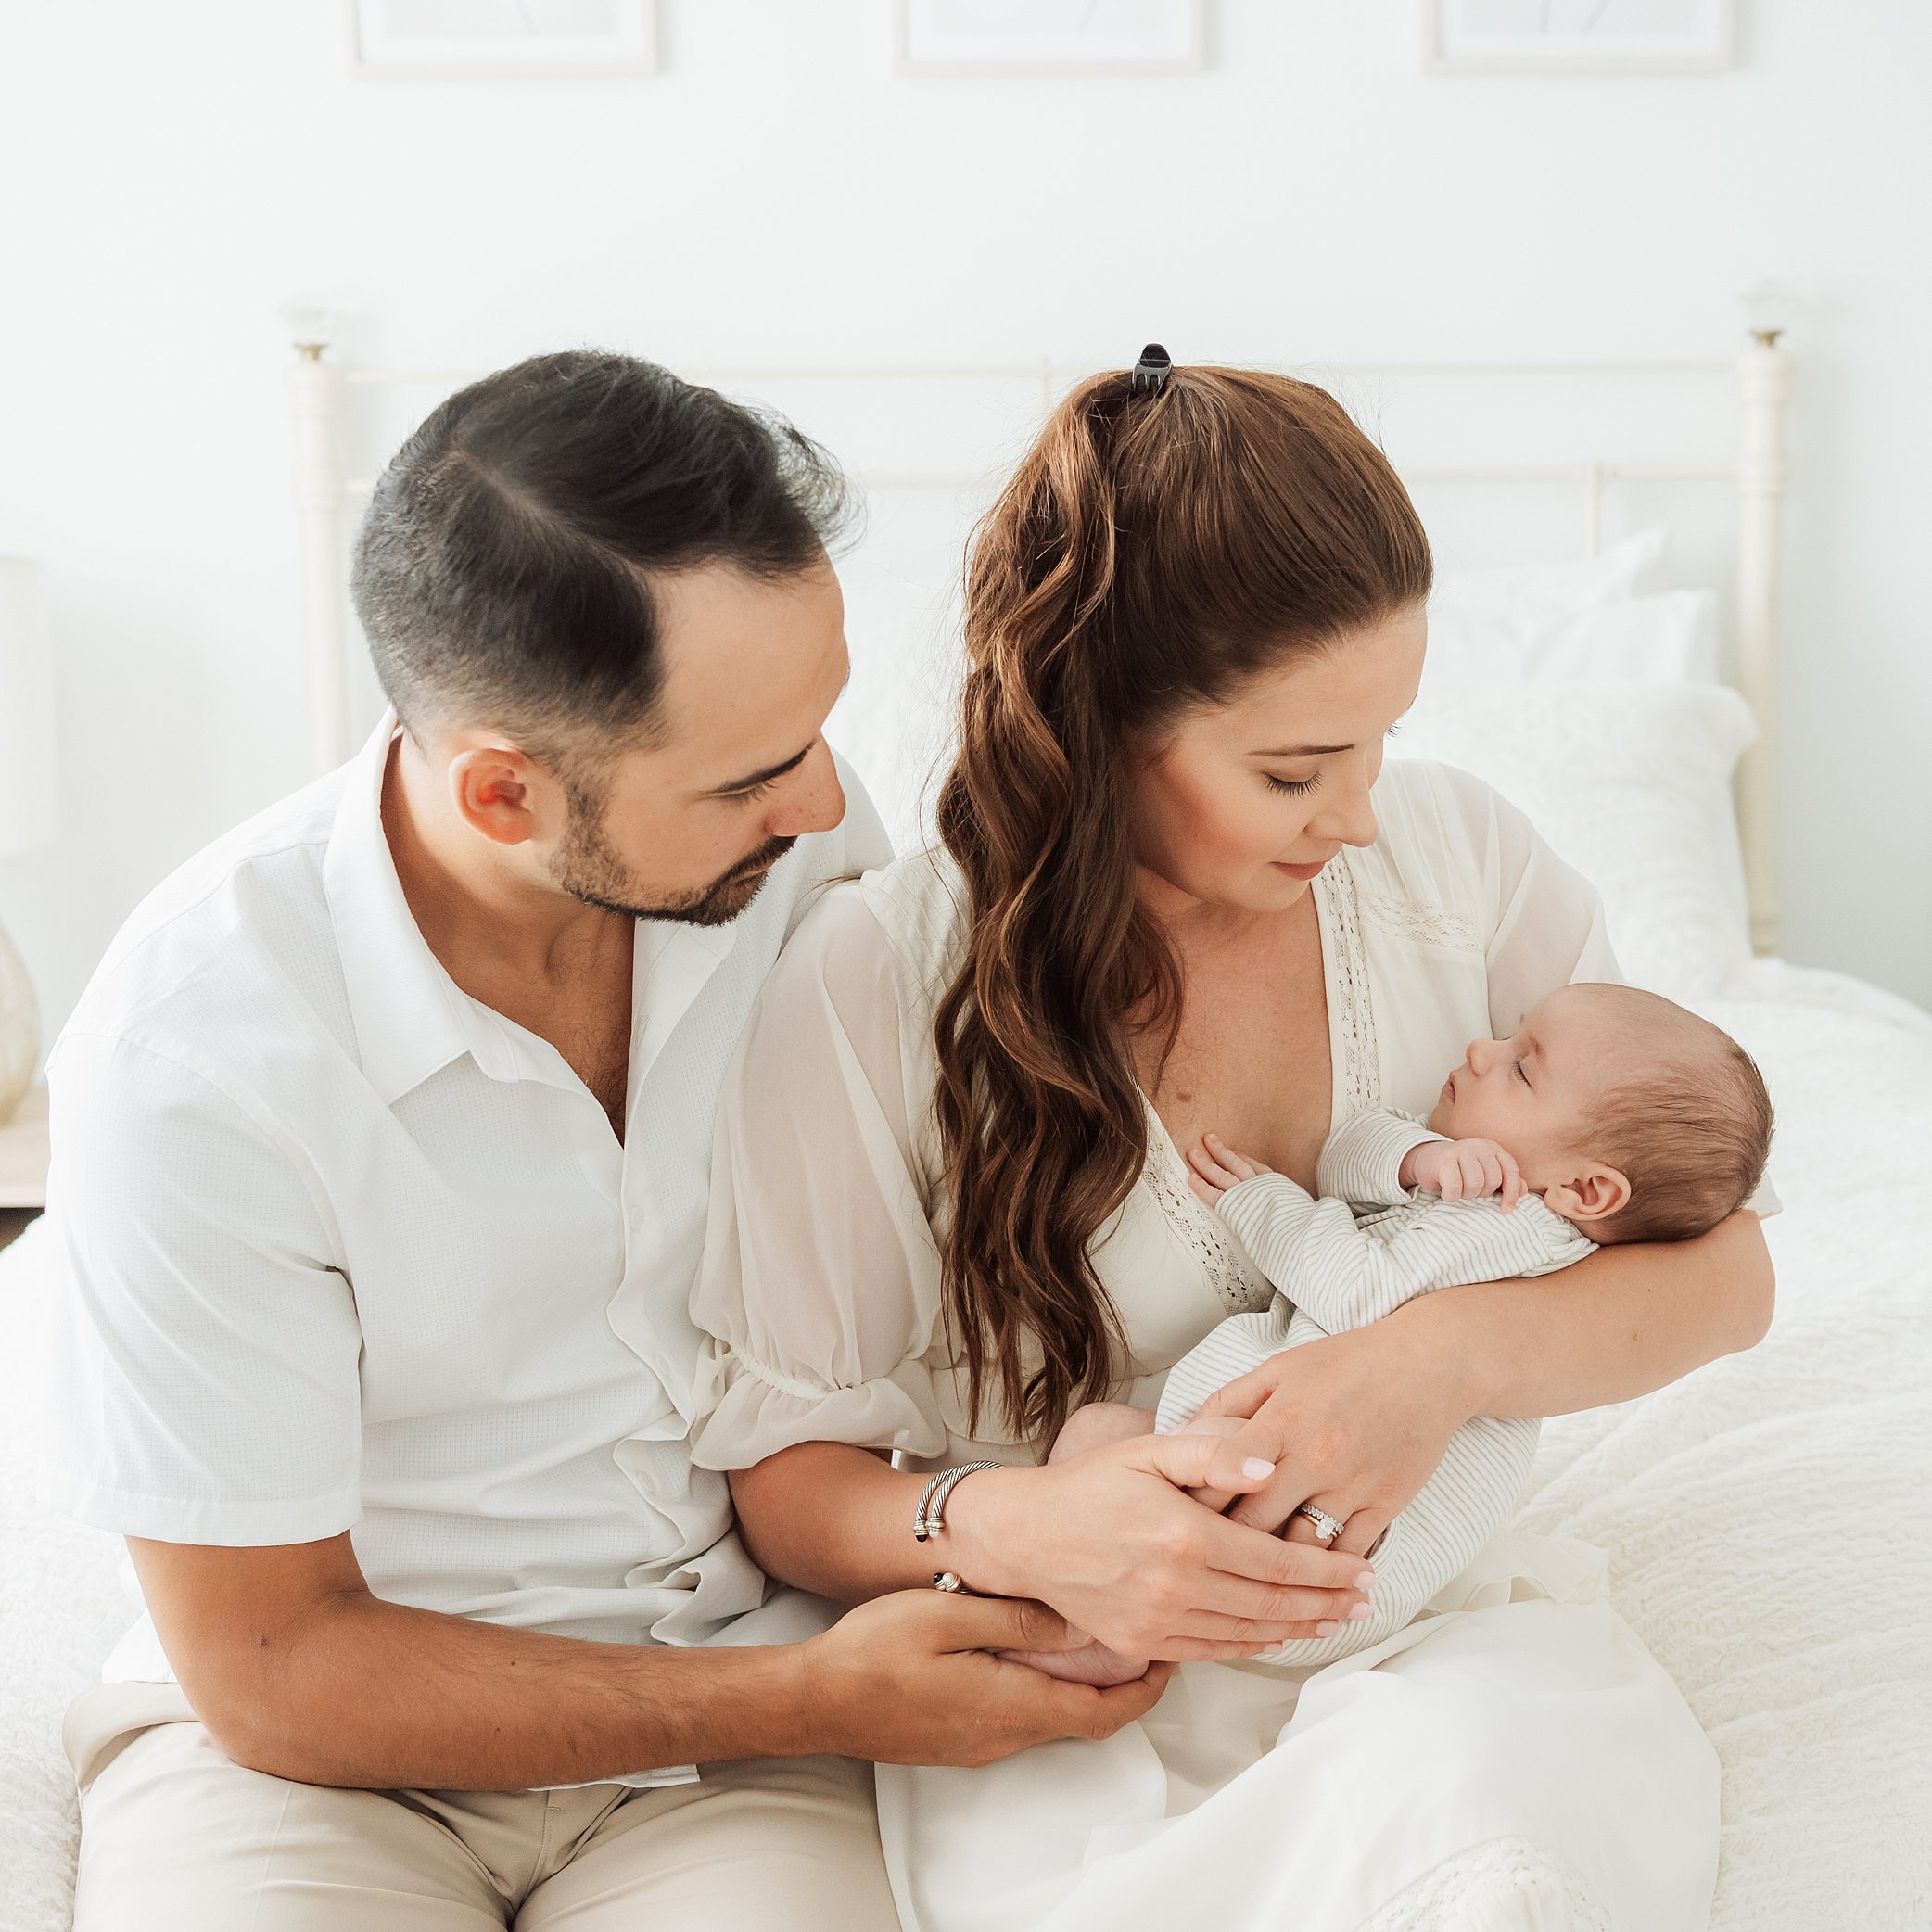 mom, dad in white on a white bed looking at newborn baby